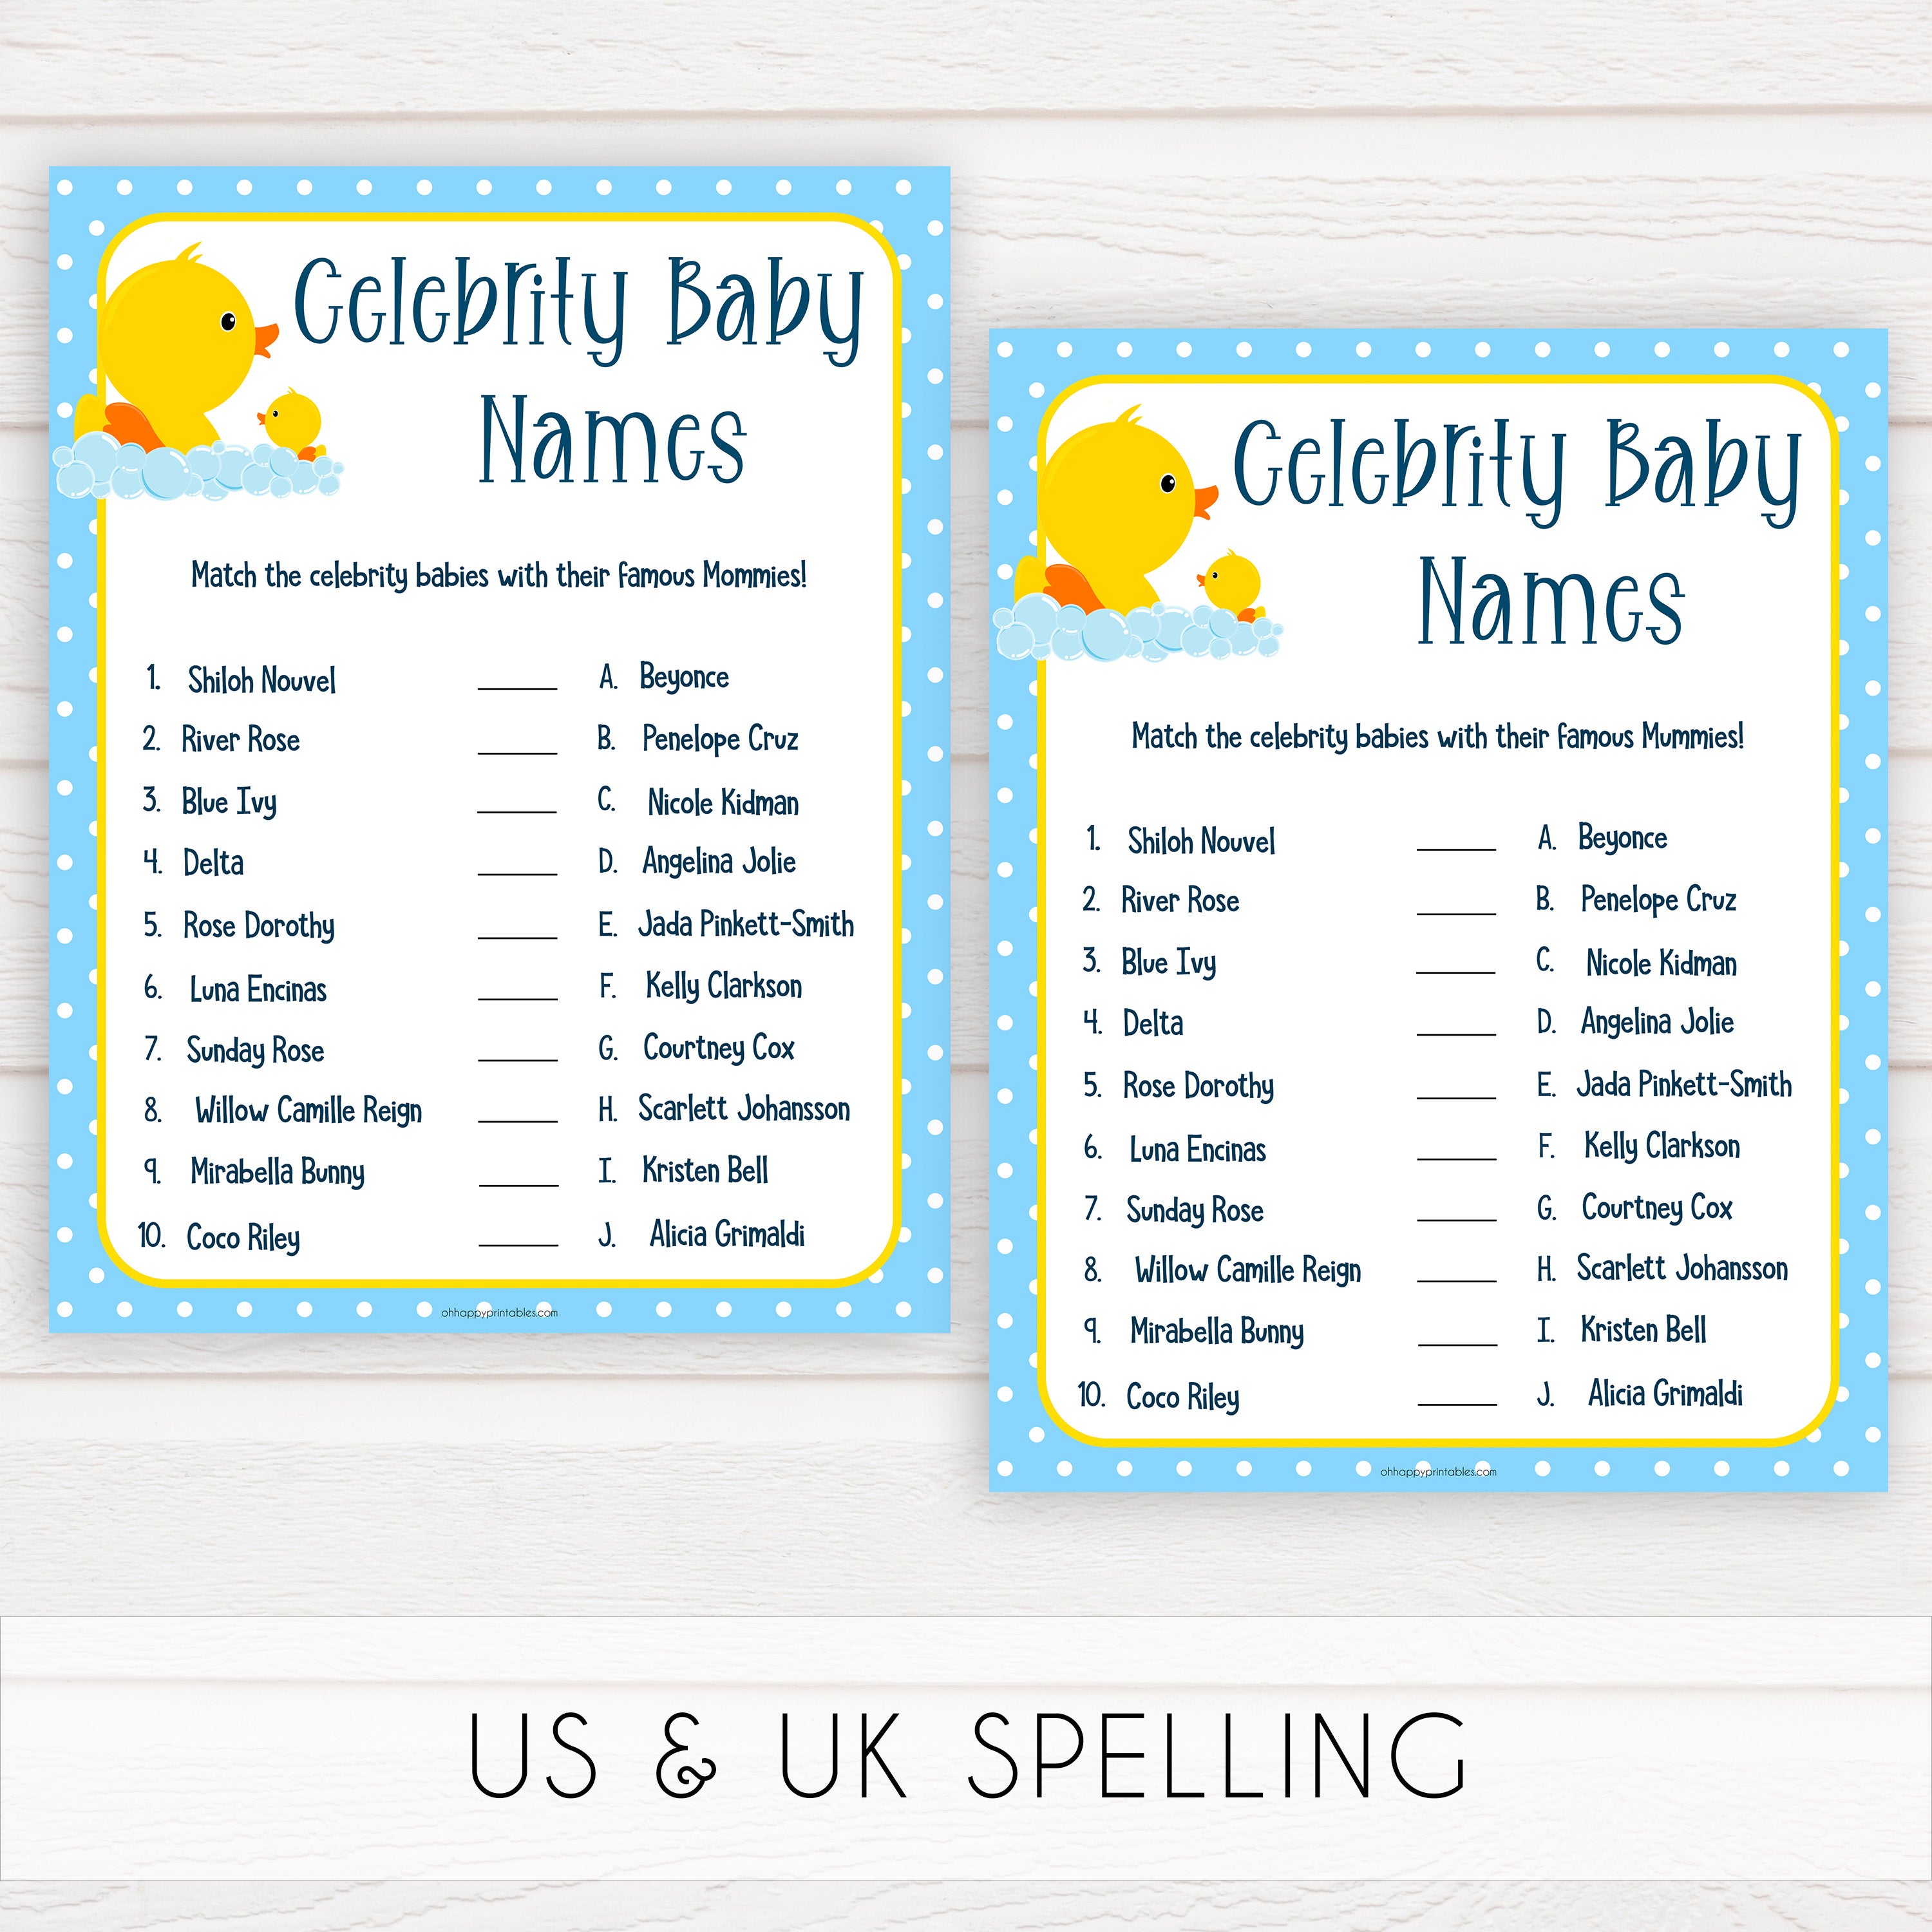 rubber ducky baby games, celebrity baby names baby game, printable baby games, baby shower games, rubber ducky baby theme, fun baby games, popular baby games